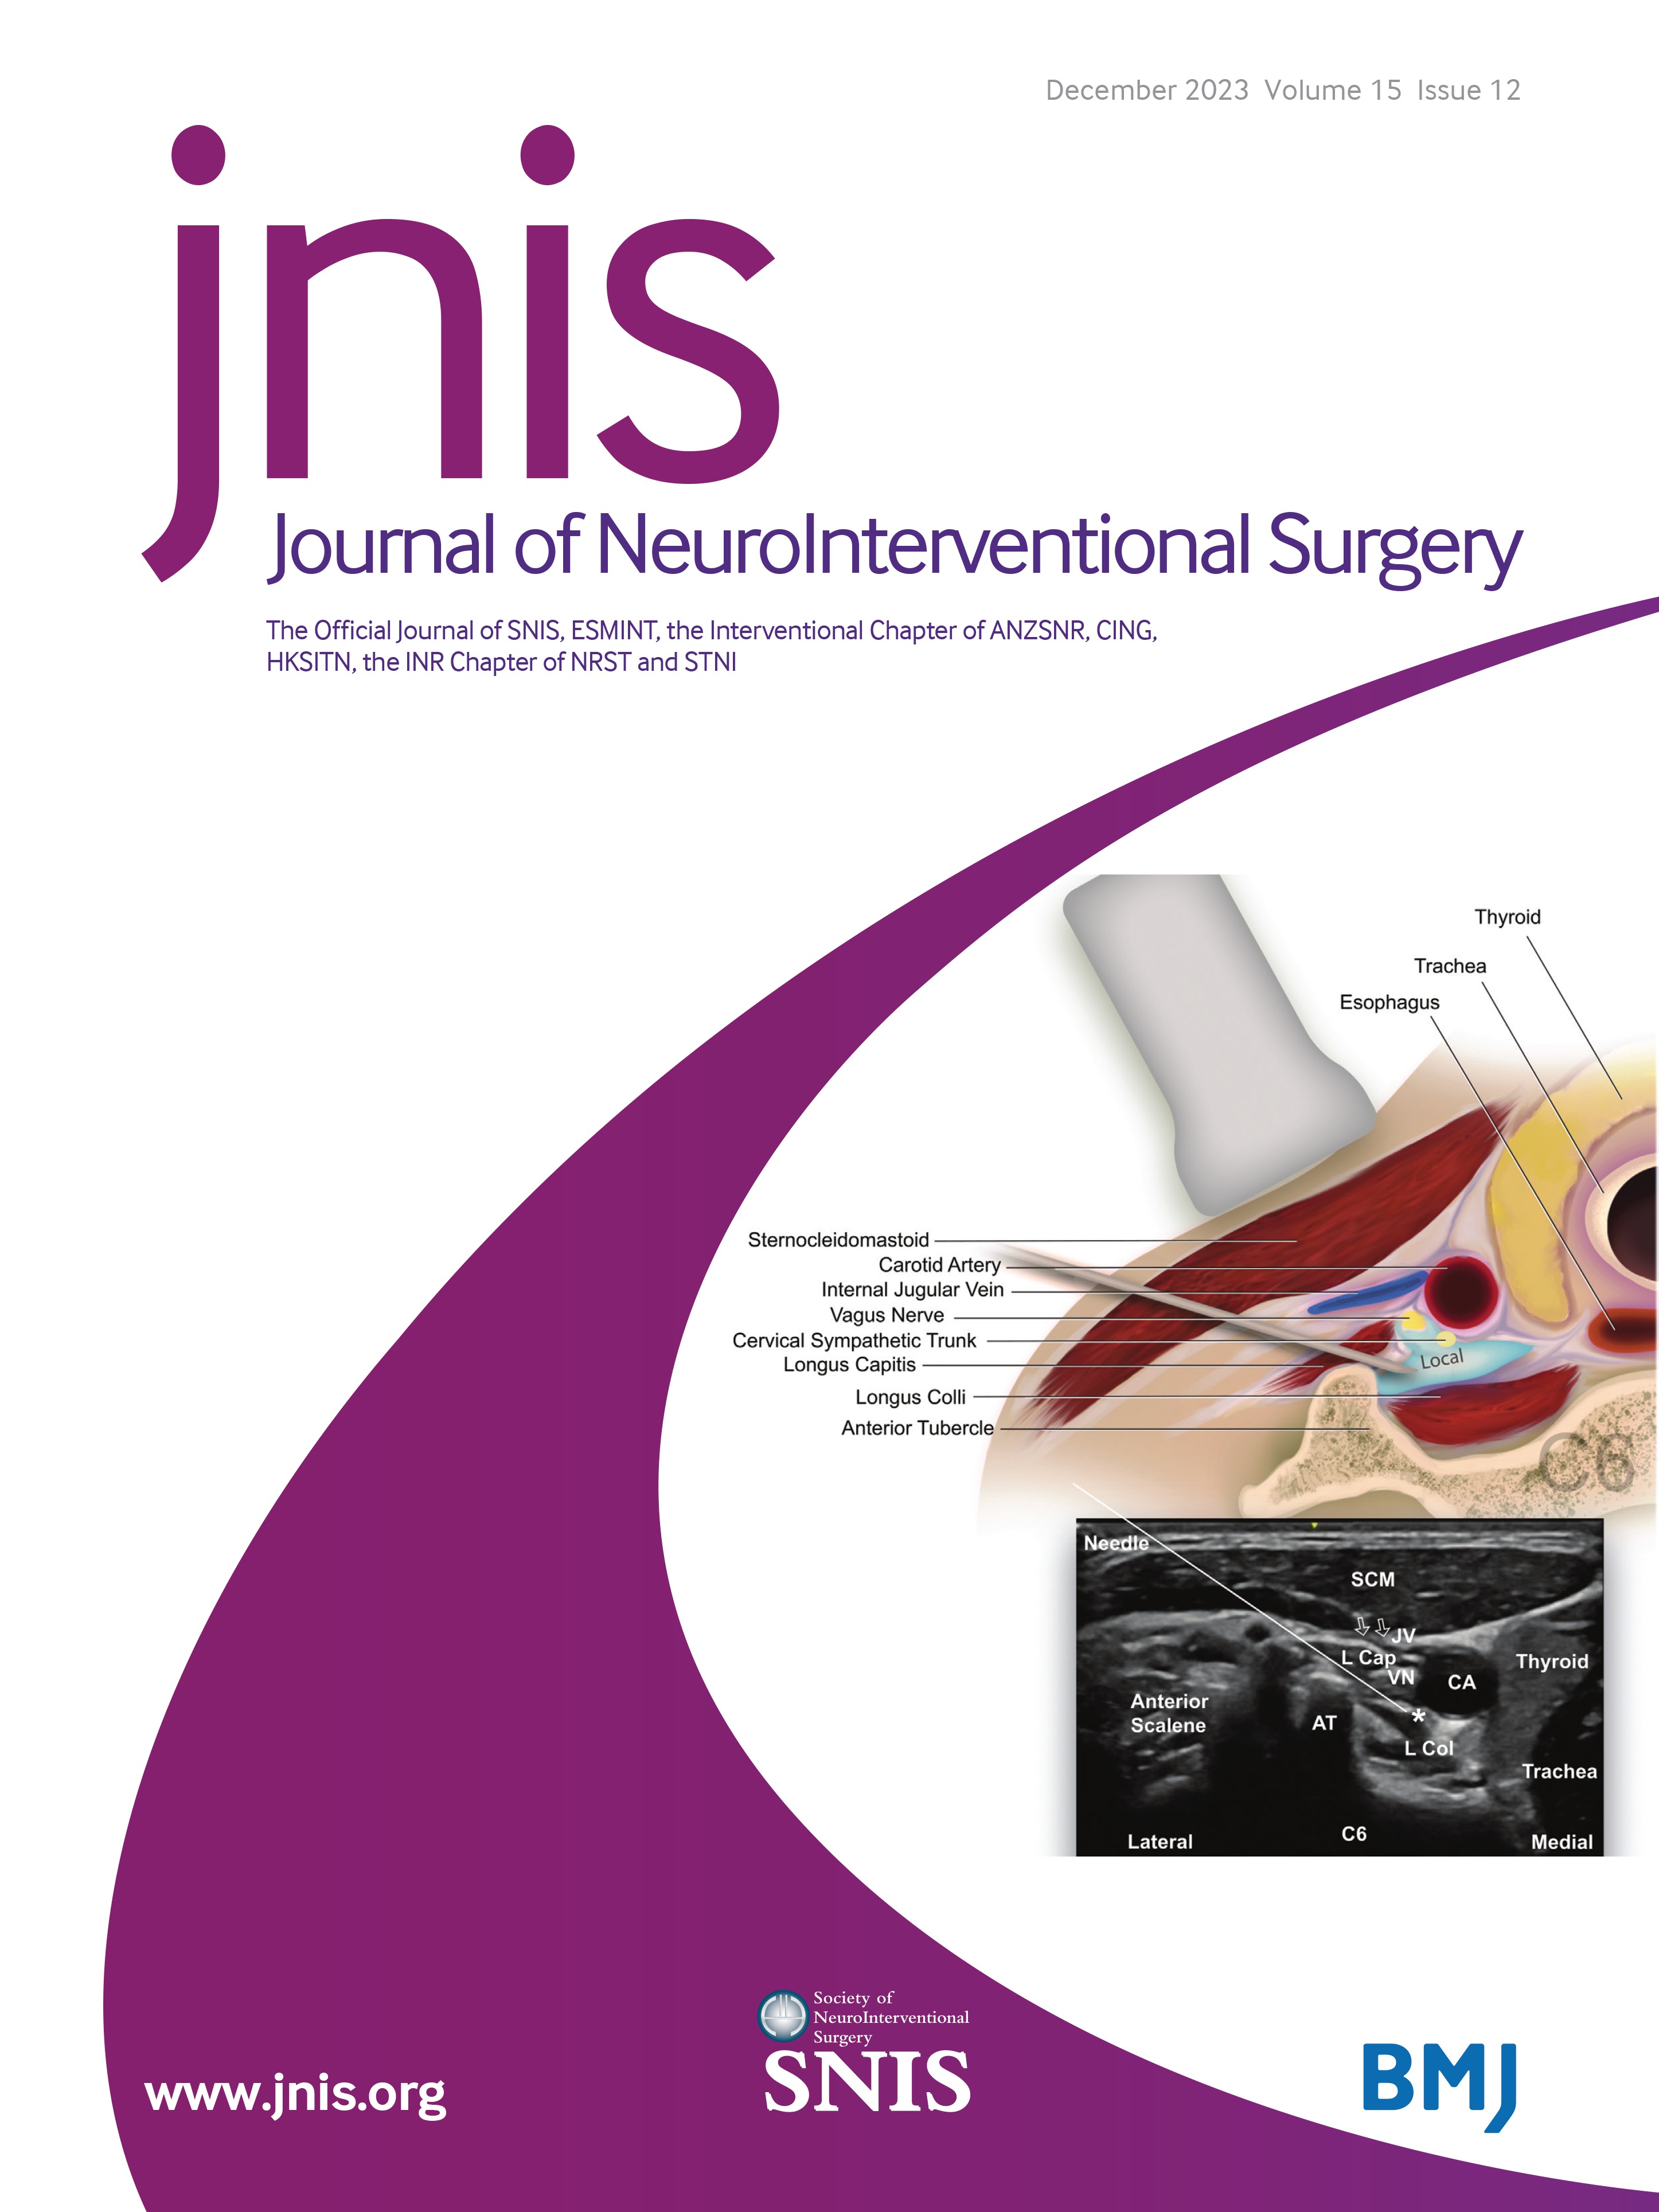 Safety and effectiveness of the Woven EndoBridge (WEB) system for the treatment of wide necked bifurcation aneurysms: final 5 year results of the pivotal WEB Intra-saccular Therapy study (WEB-IT)